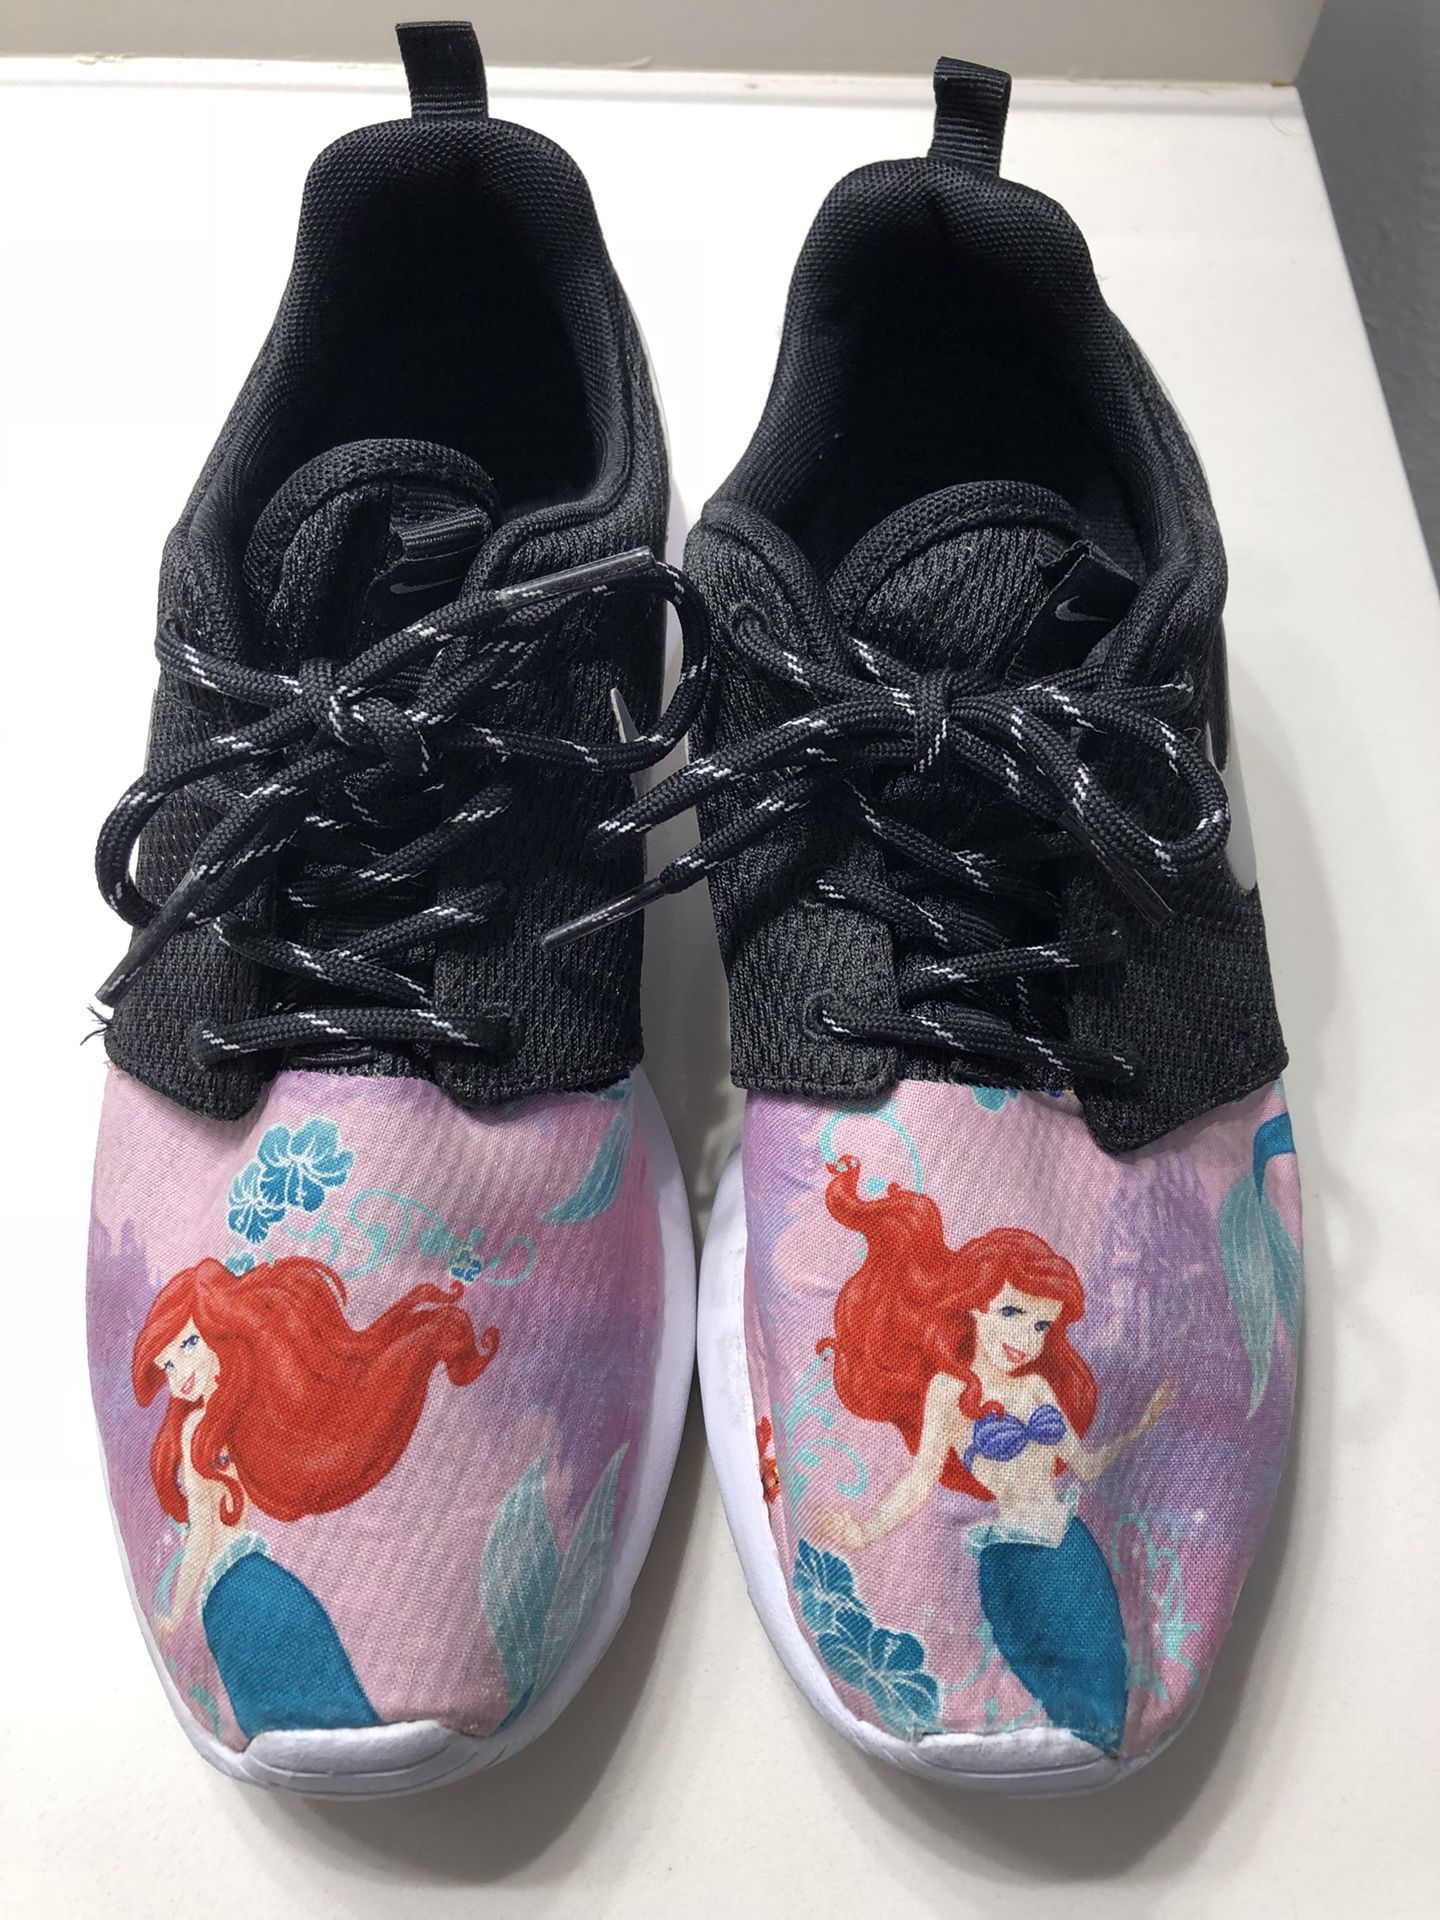 Astronave Del Sur Con qué frecuencia Custom Nike Roshe Sneakers - Little Mermaid Ariel Pattern - Size 7.5 for  Sale in Fremont, CA - OfferUp